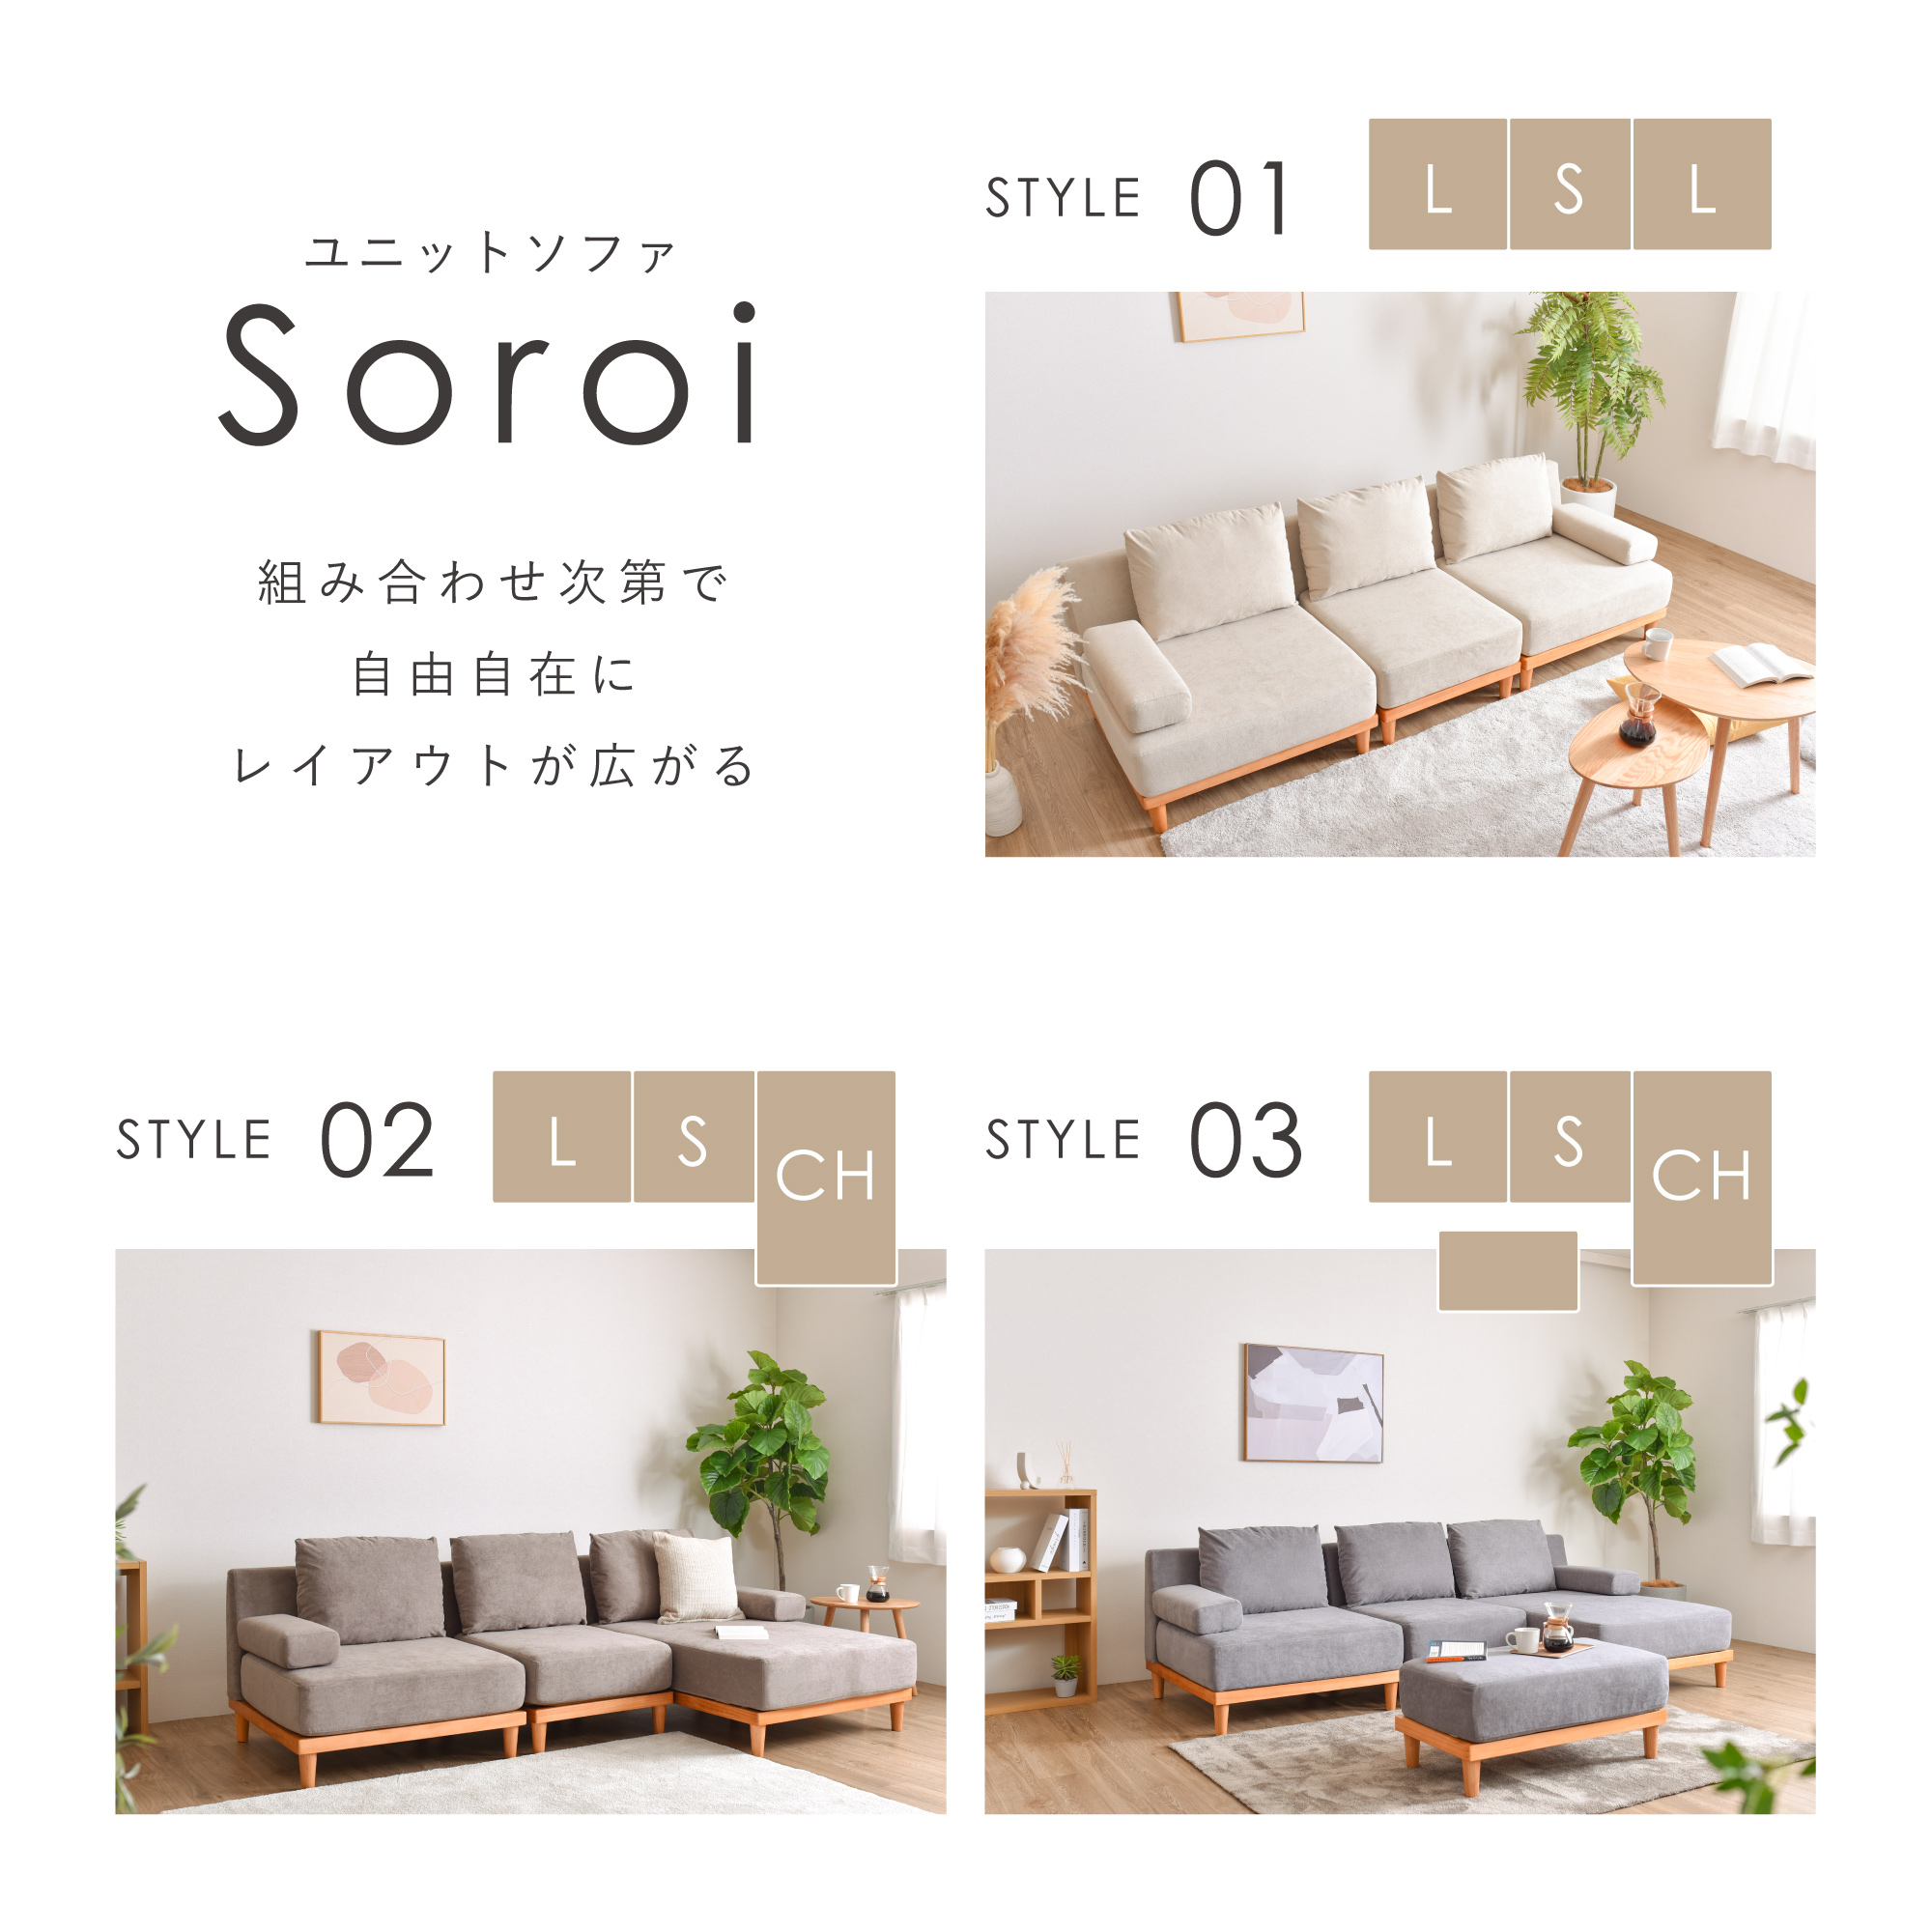  ottoman chair sofa sofa natural tree pair put legs put stool chair Mini one person living compact living natural simple Northern Europe soft Soroi for 